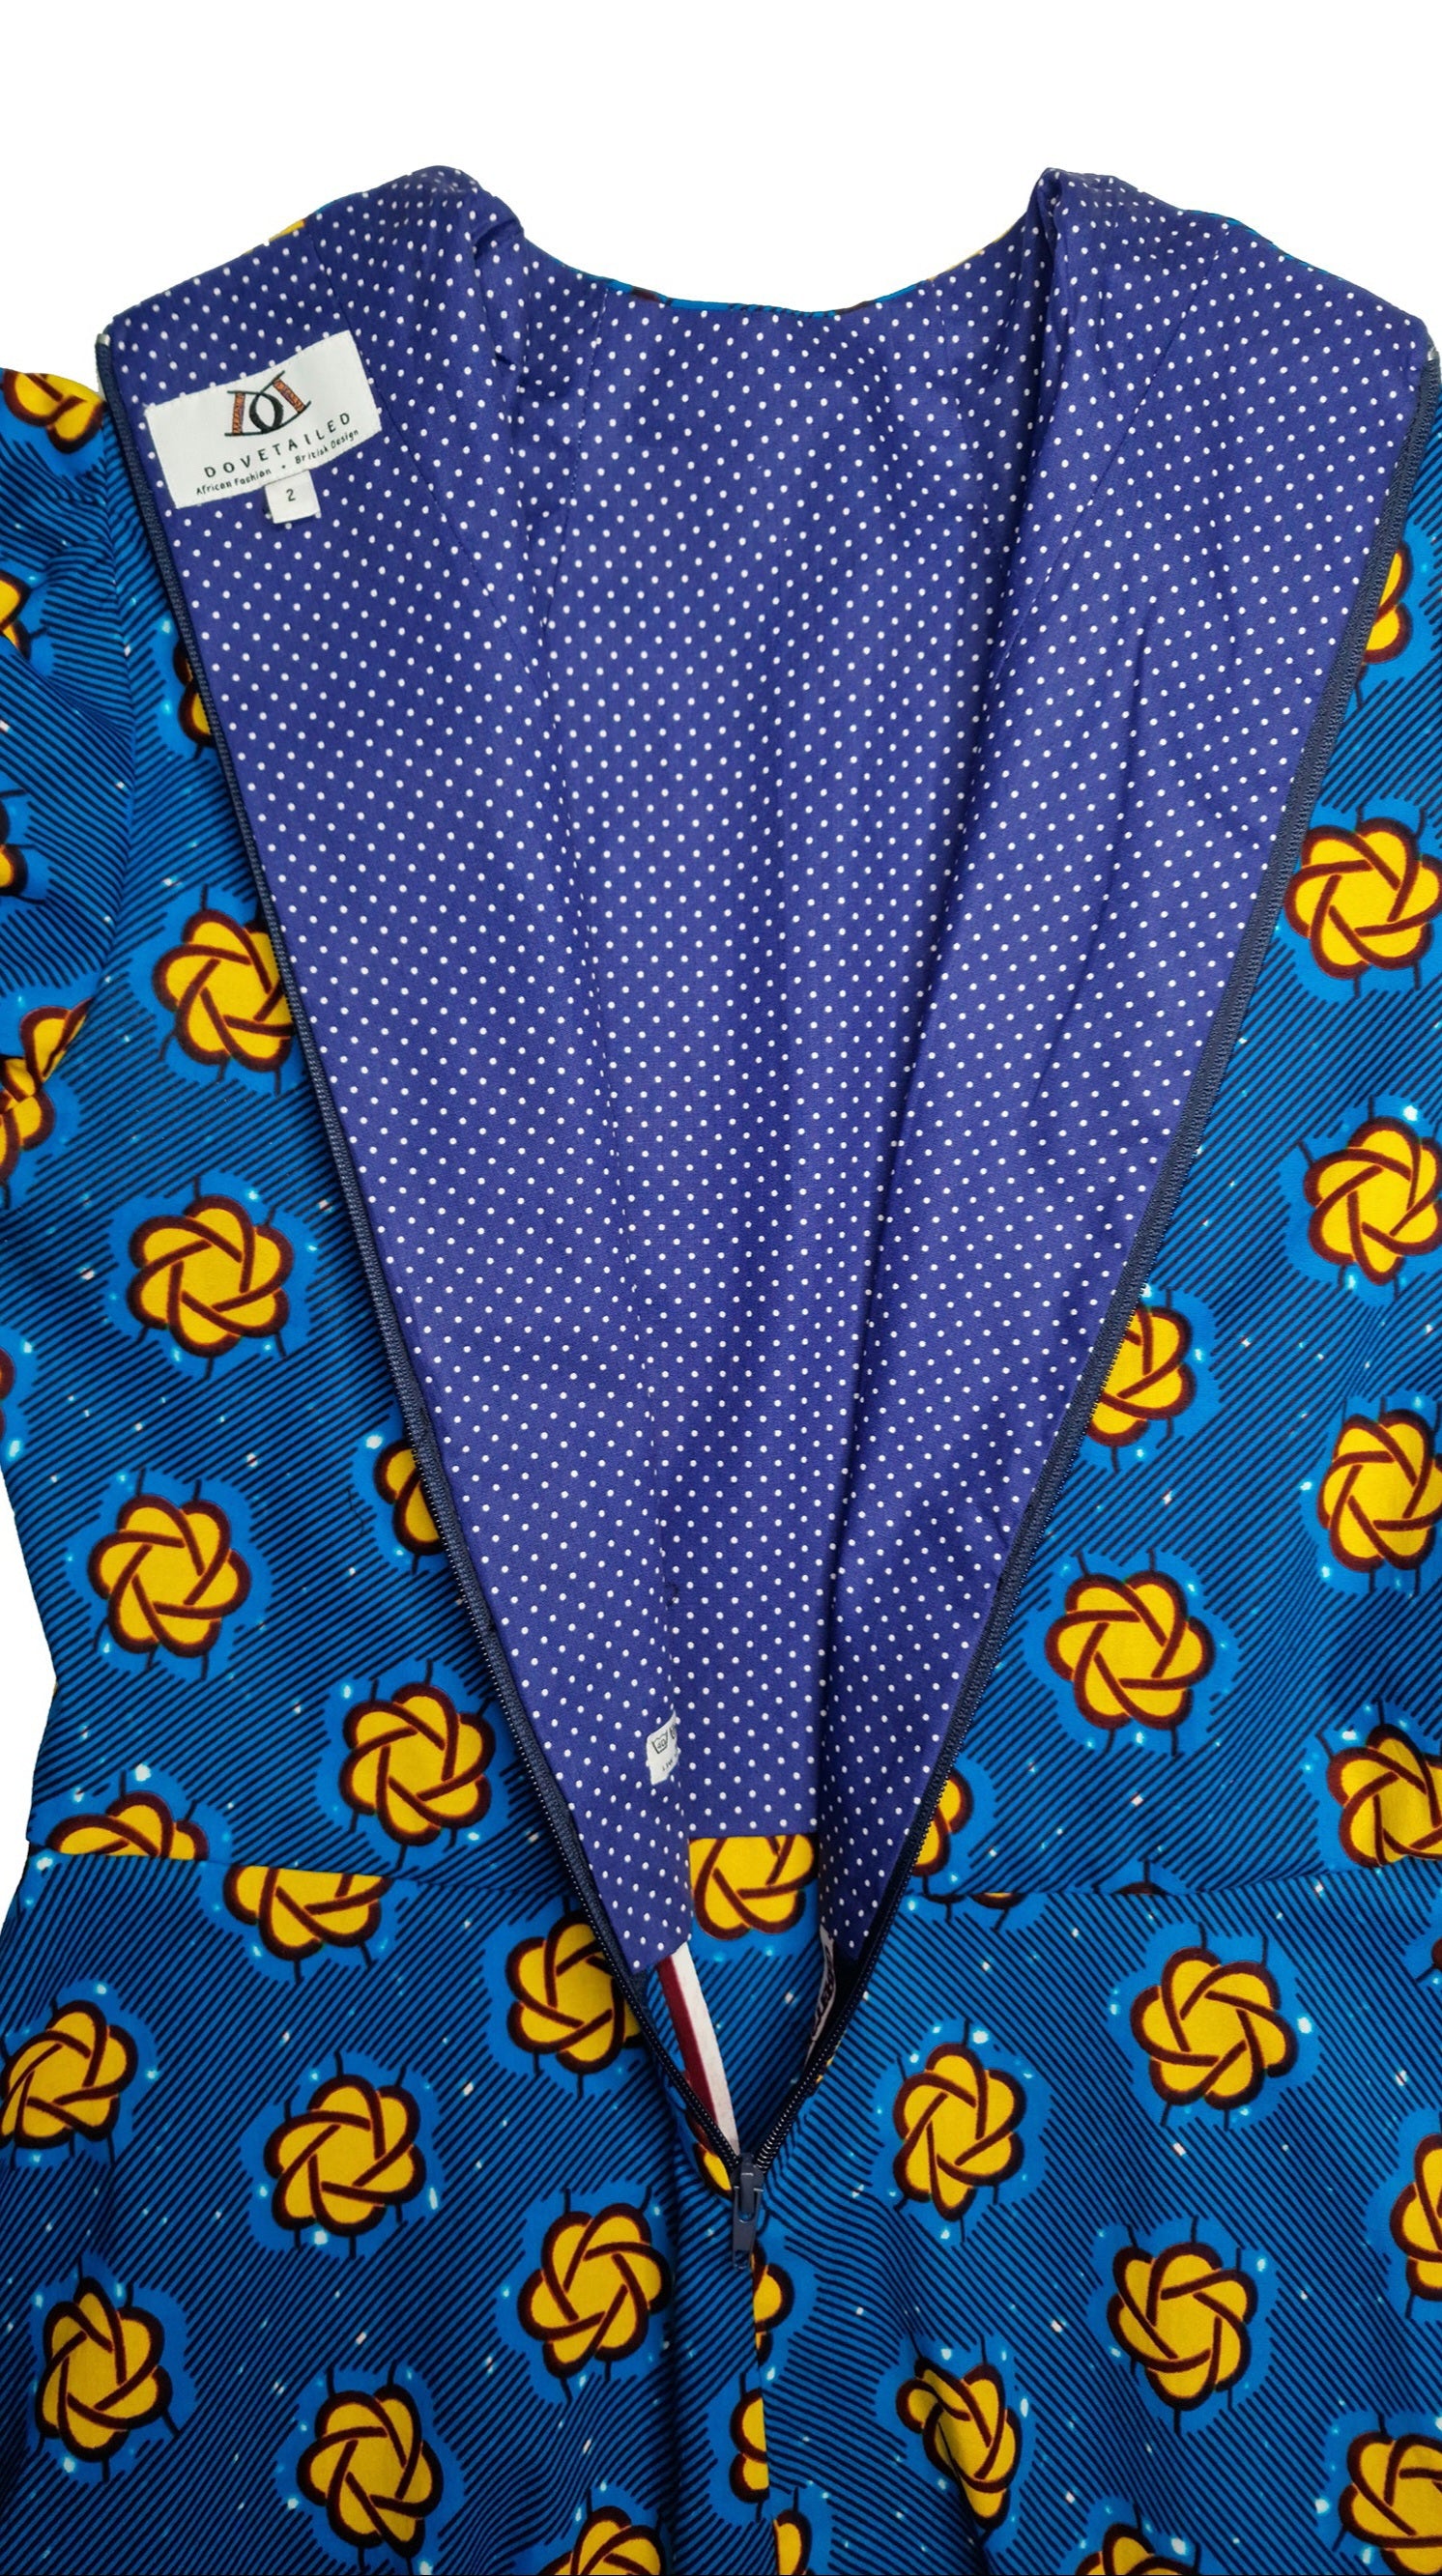 A close-up view of the rear zipper of the blue print dress reveals a darker shade of blue inside fabric, emphasising the high quality of the garment.